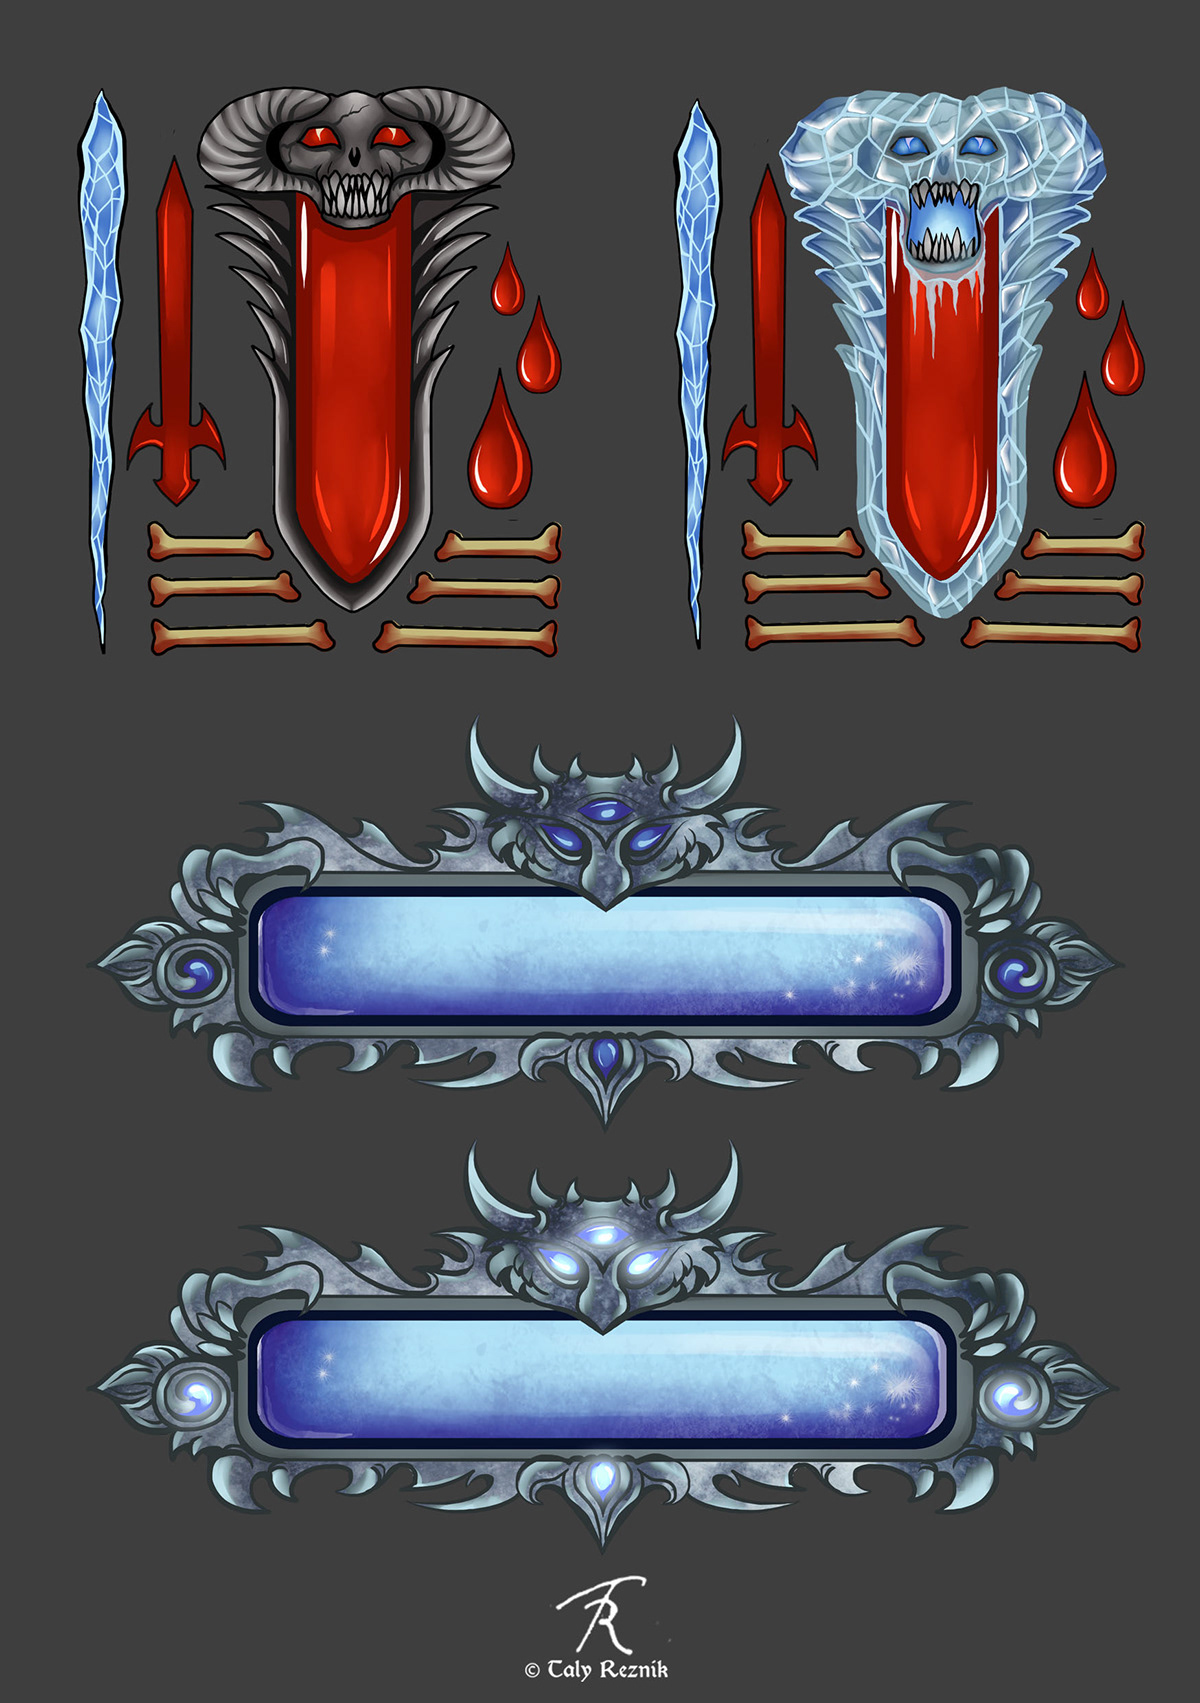 World of warcraft addons game icons